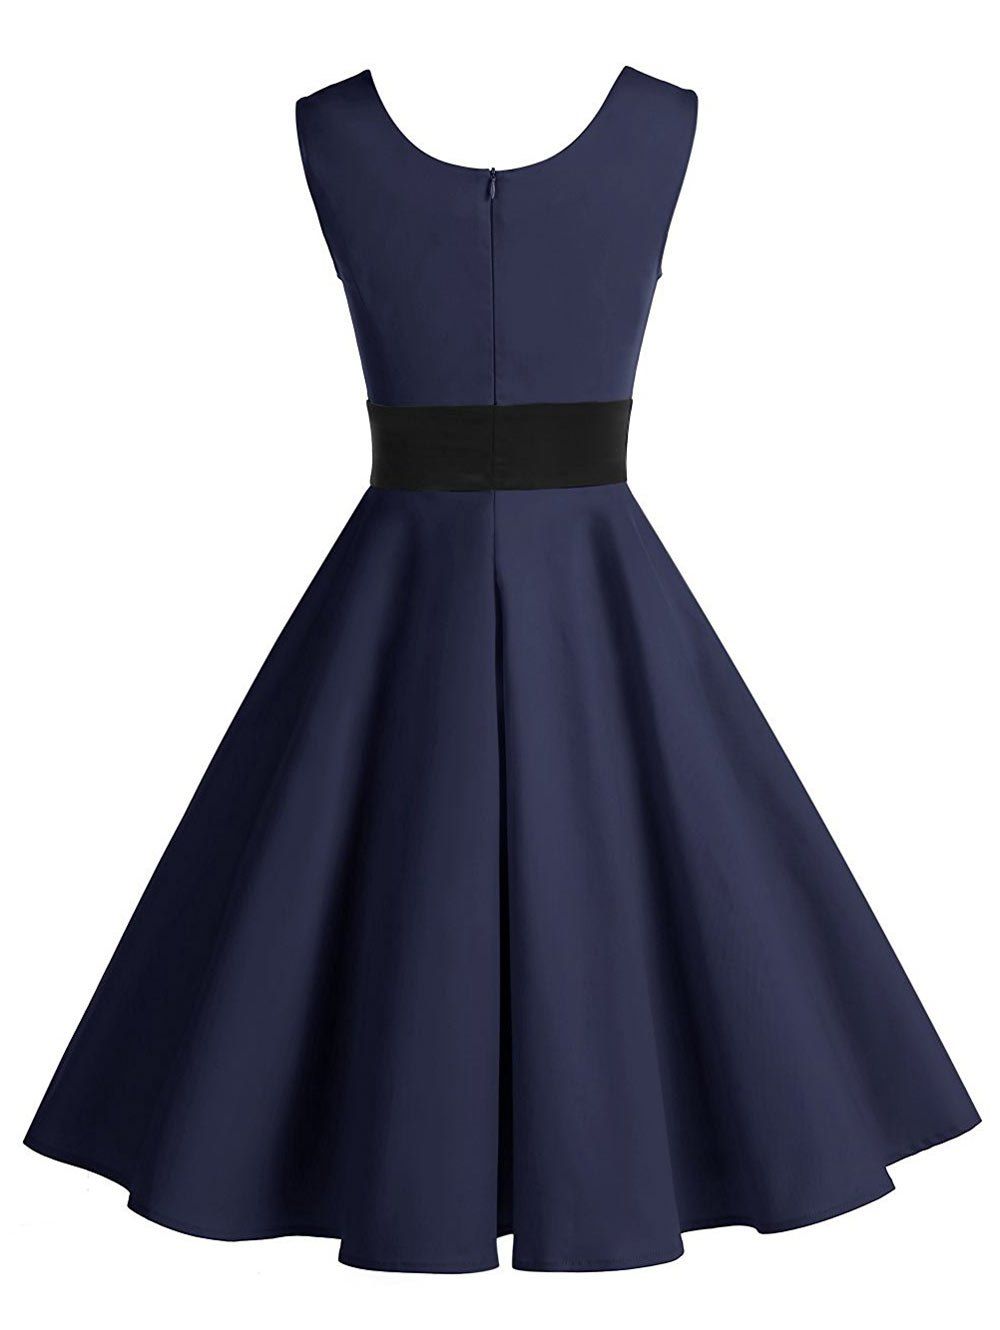 2018 Vintage Peter Pan Collar Party Pin Up Dress DEEP BLUE S In Vintage ...